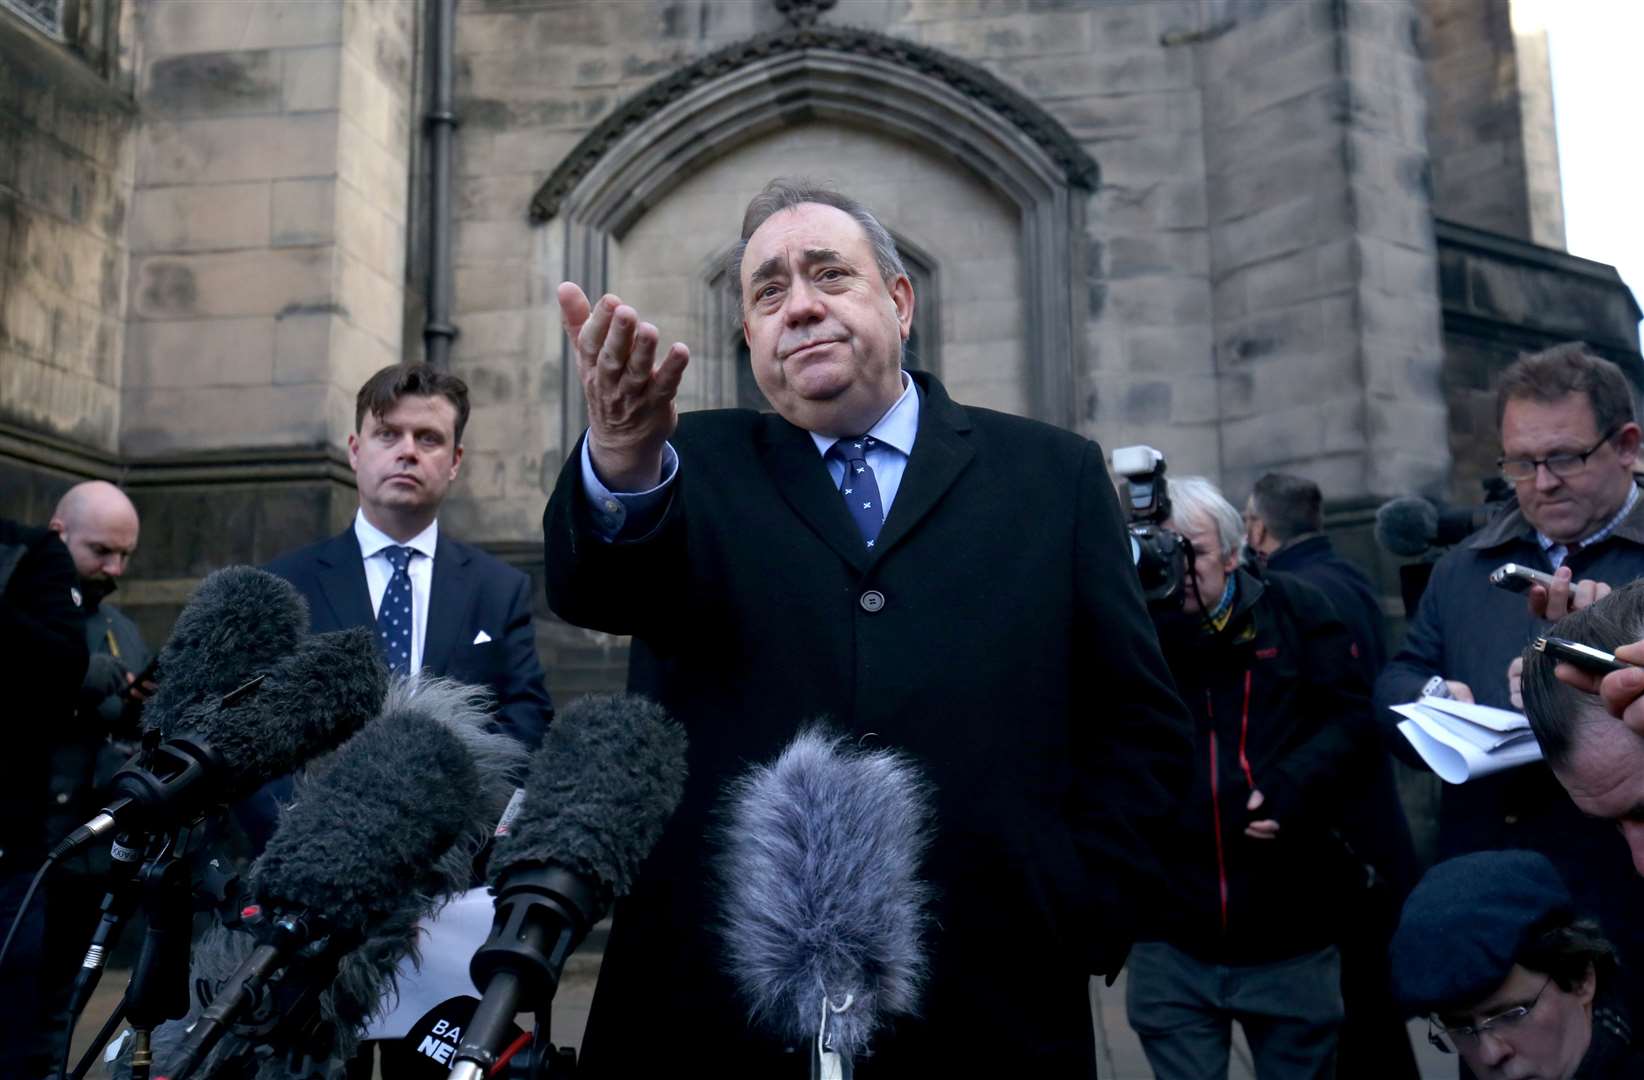 Alex Salmond held a press conference outside court after winning the case (Jane Barlow/PA)